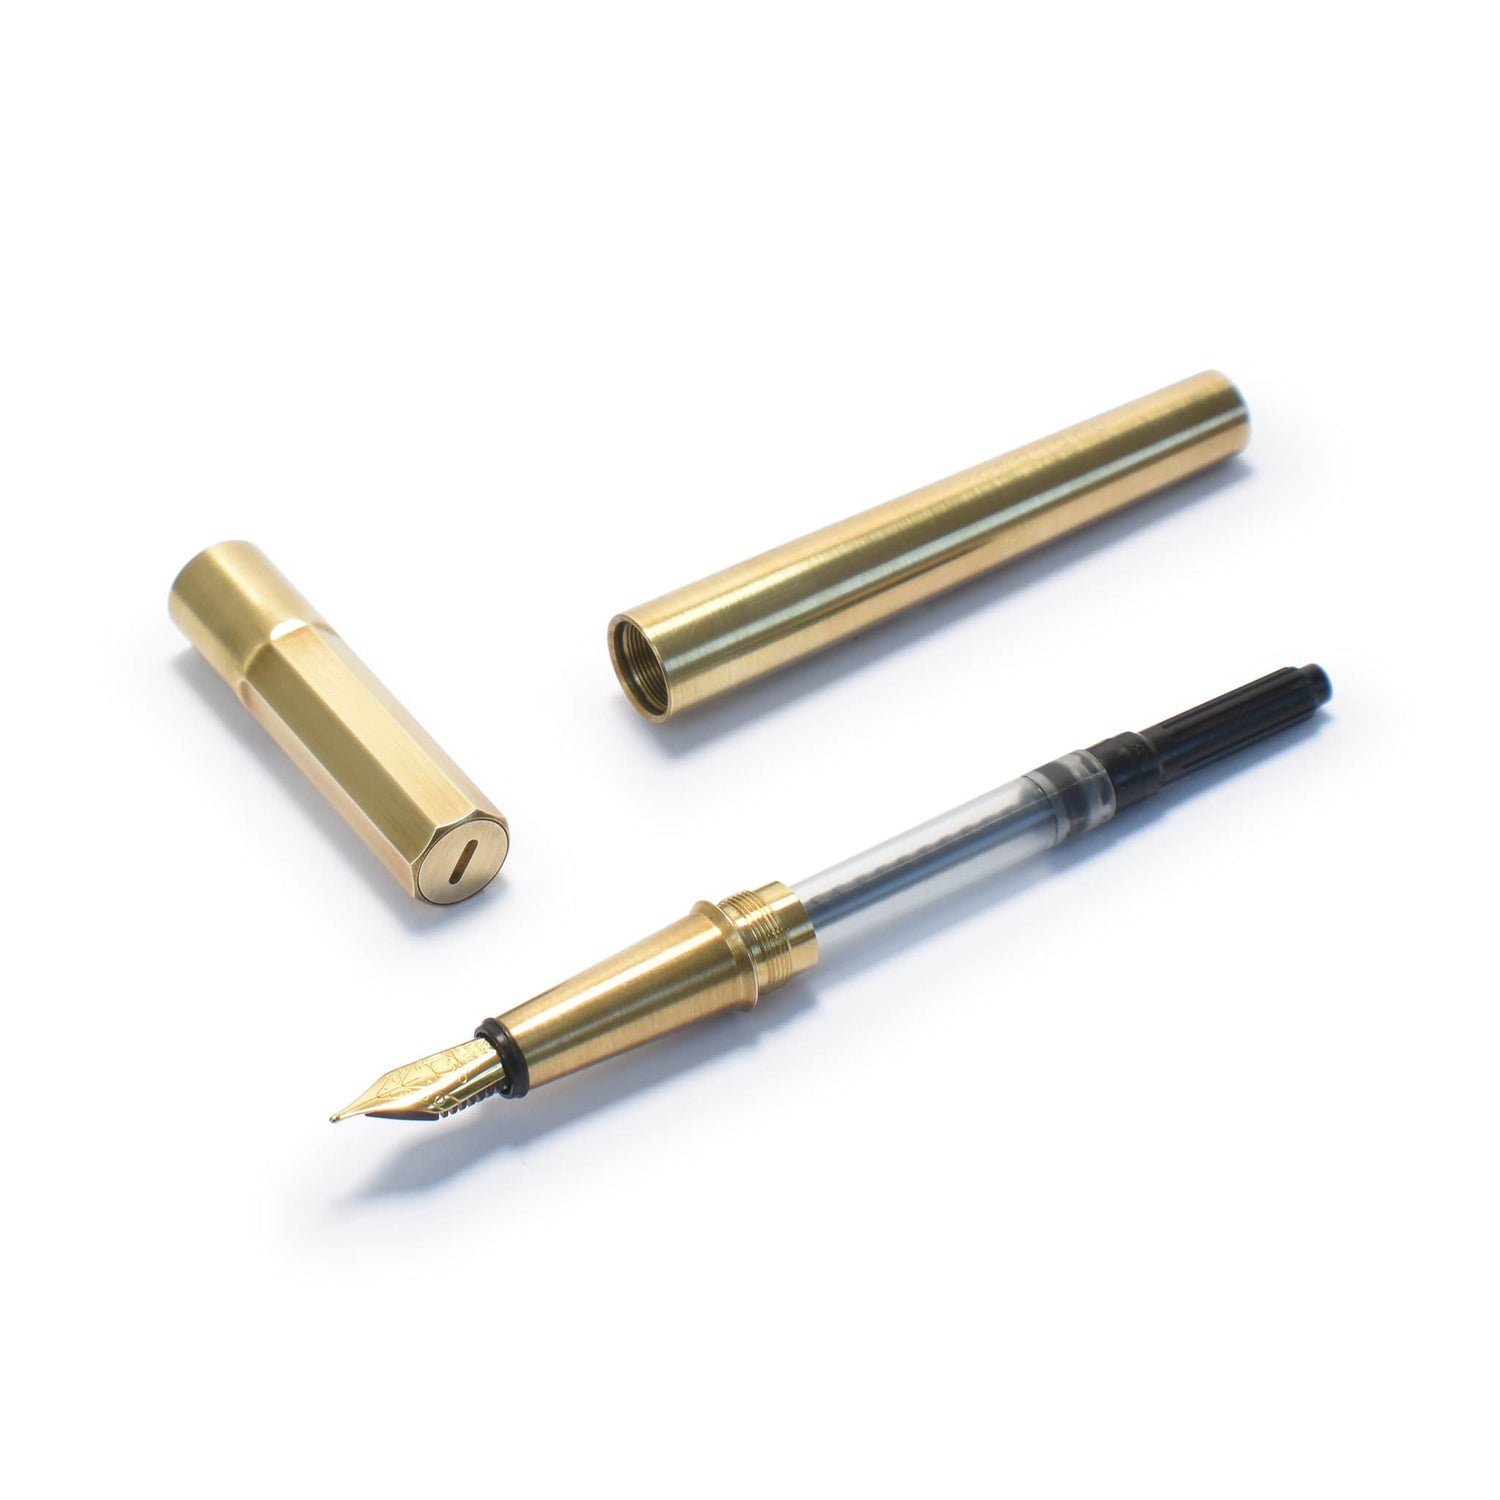 Brass fountain pen from Andhand. Shown here disassembled with various components.